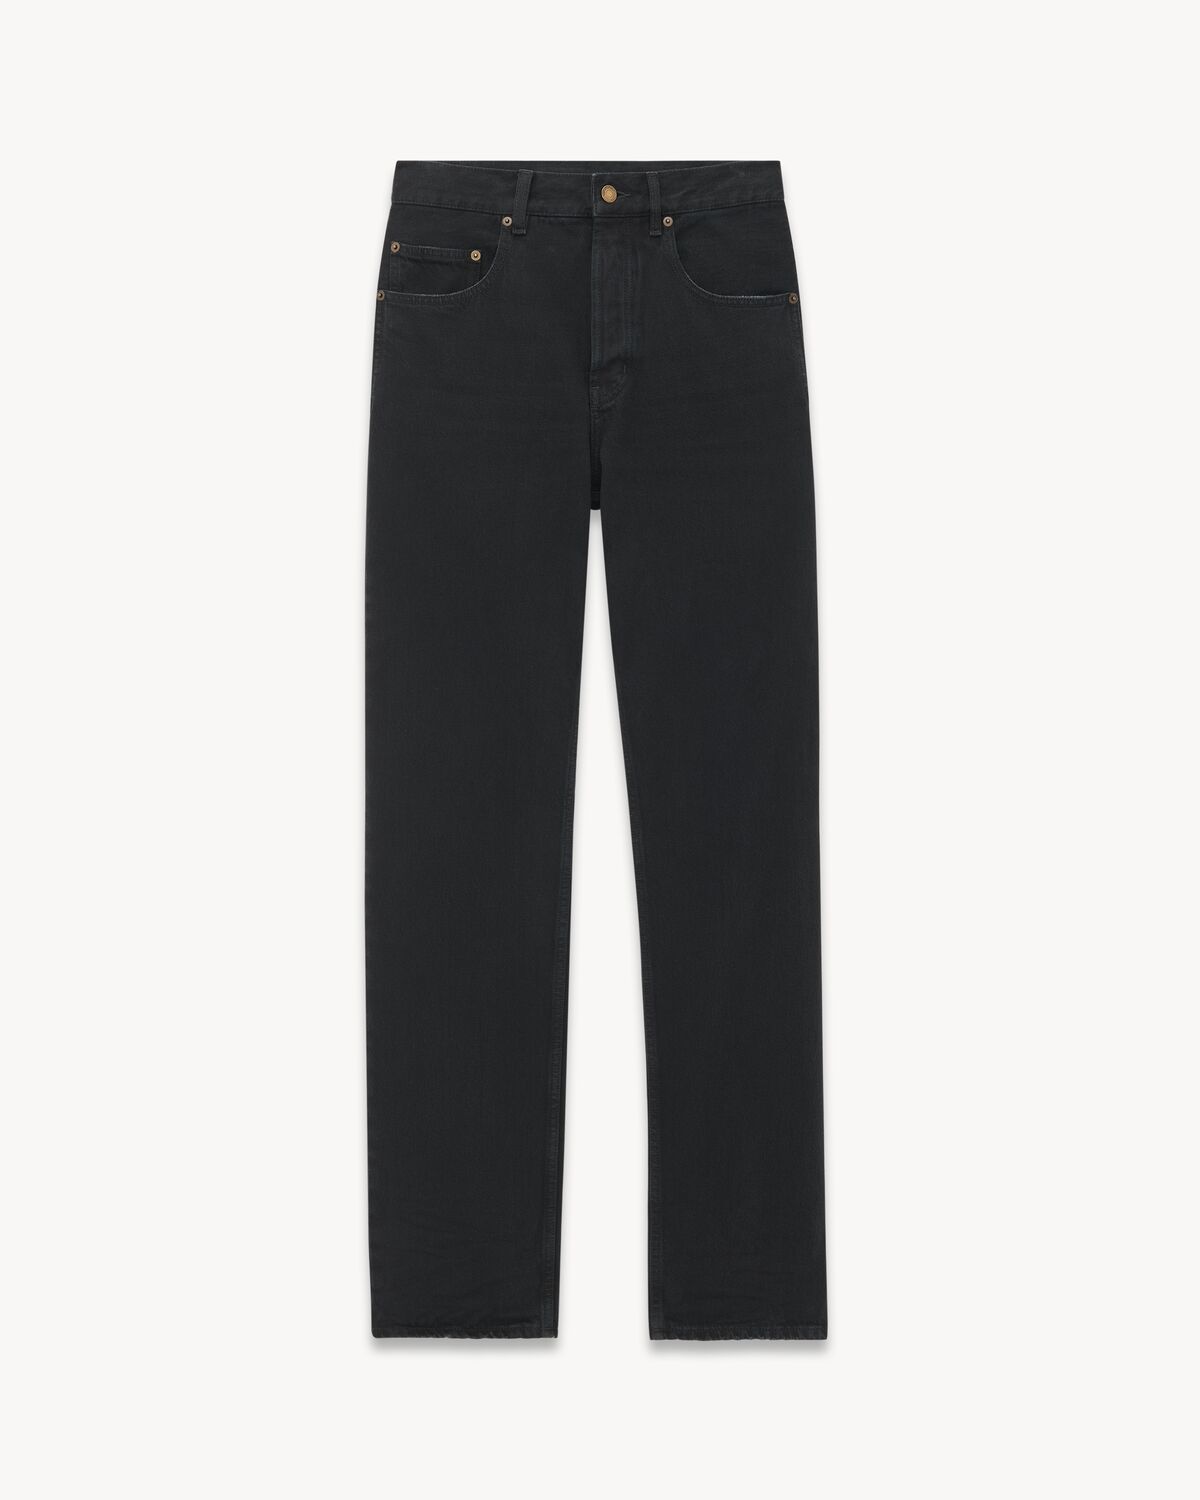 long extreme baggy jeans in carbon black denim